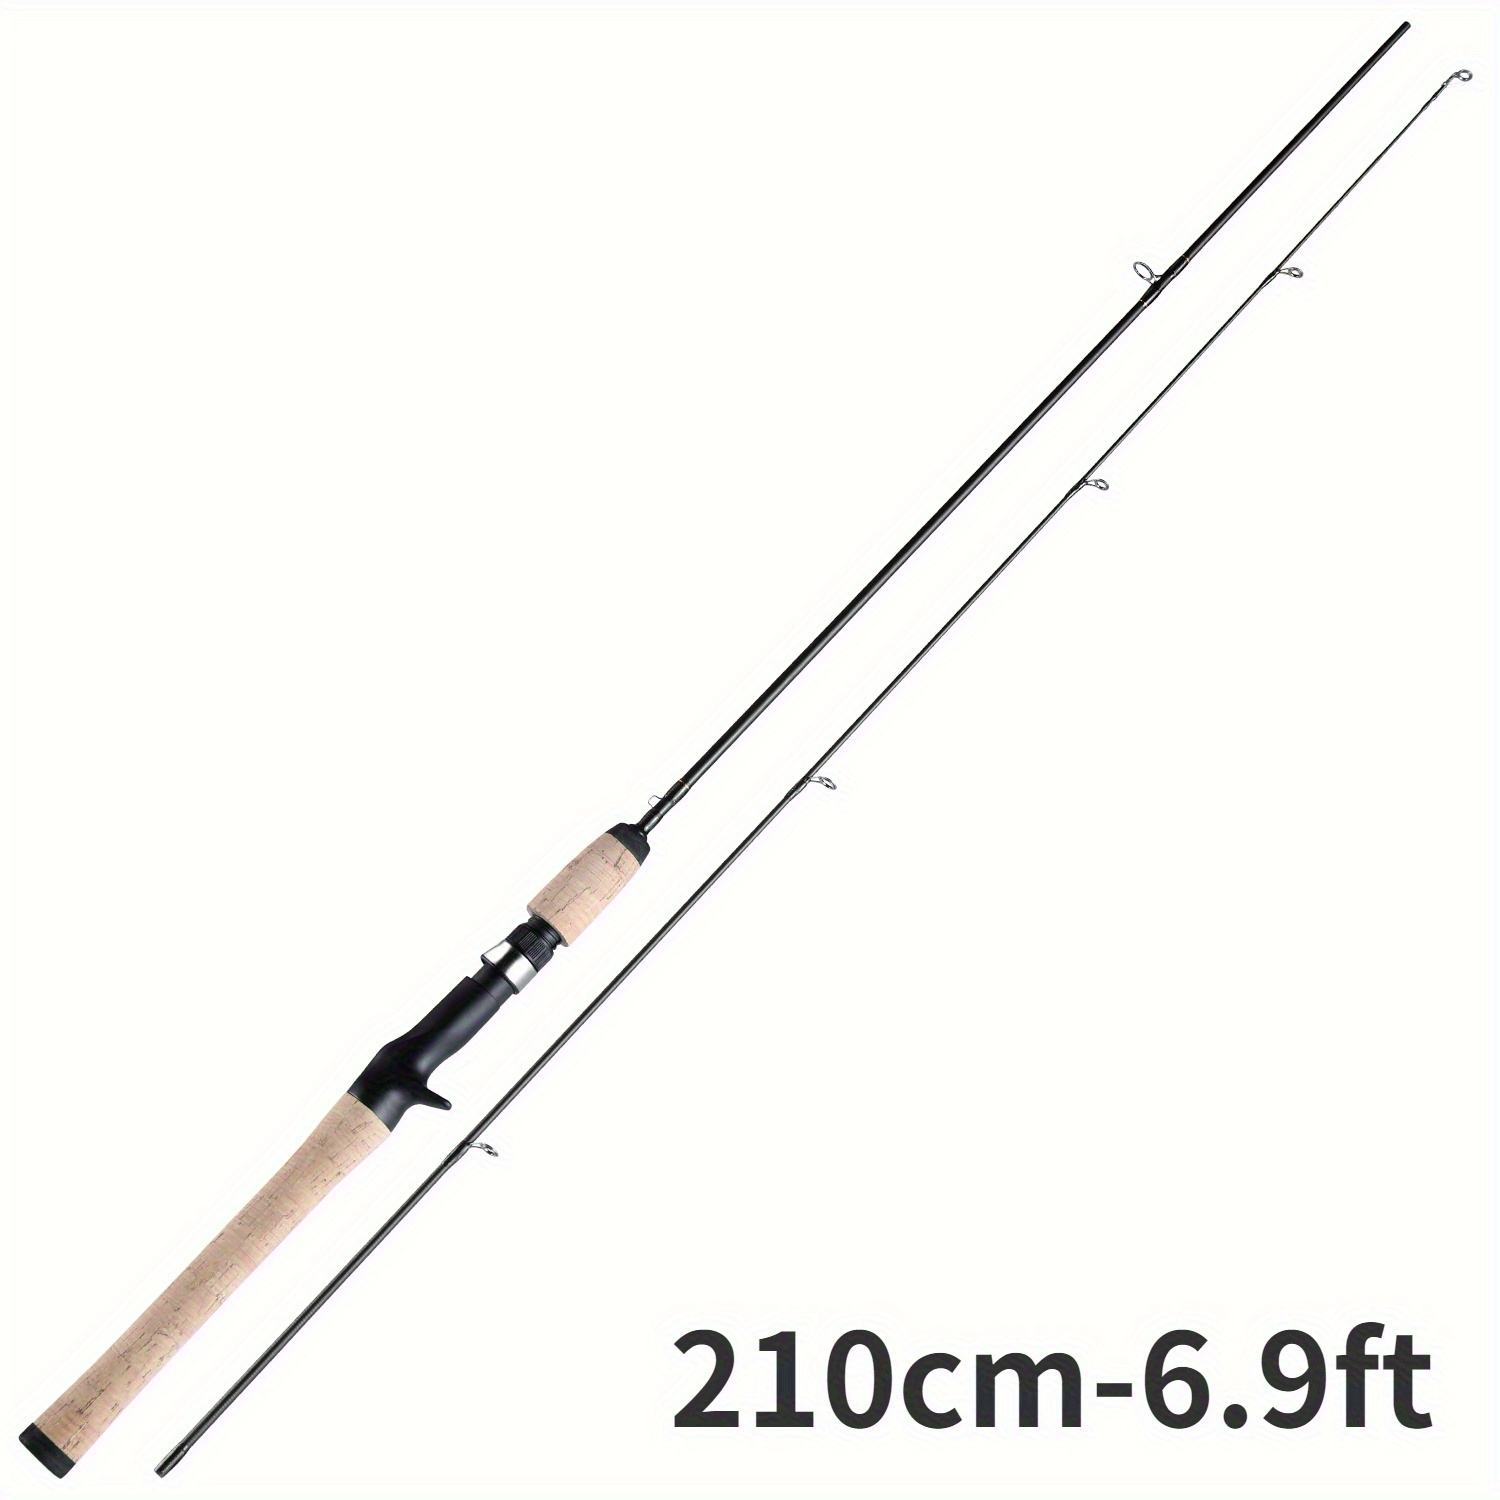 Sougayilang 180cm/5.9ft 210cm/6.9ft 240cm/7.9ft Fishing Rod, Ultra-Light UL  Power Fishing Pole With Cork Handle, Spinning & Casting Rod For Freshwater